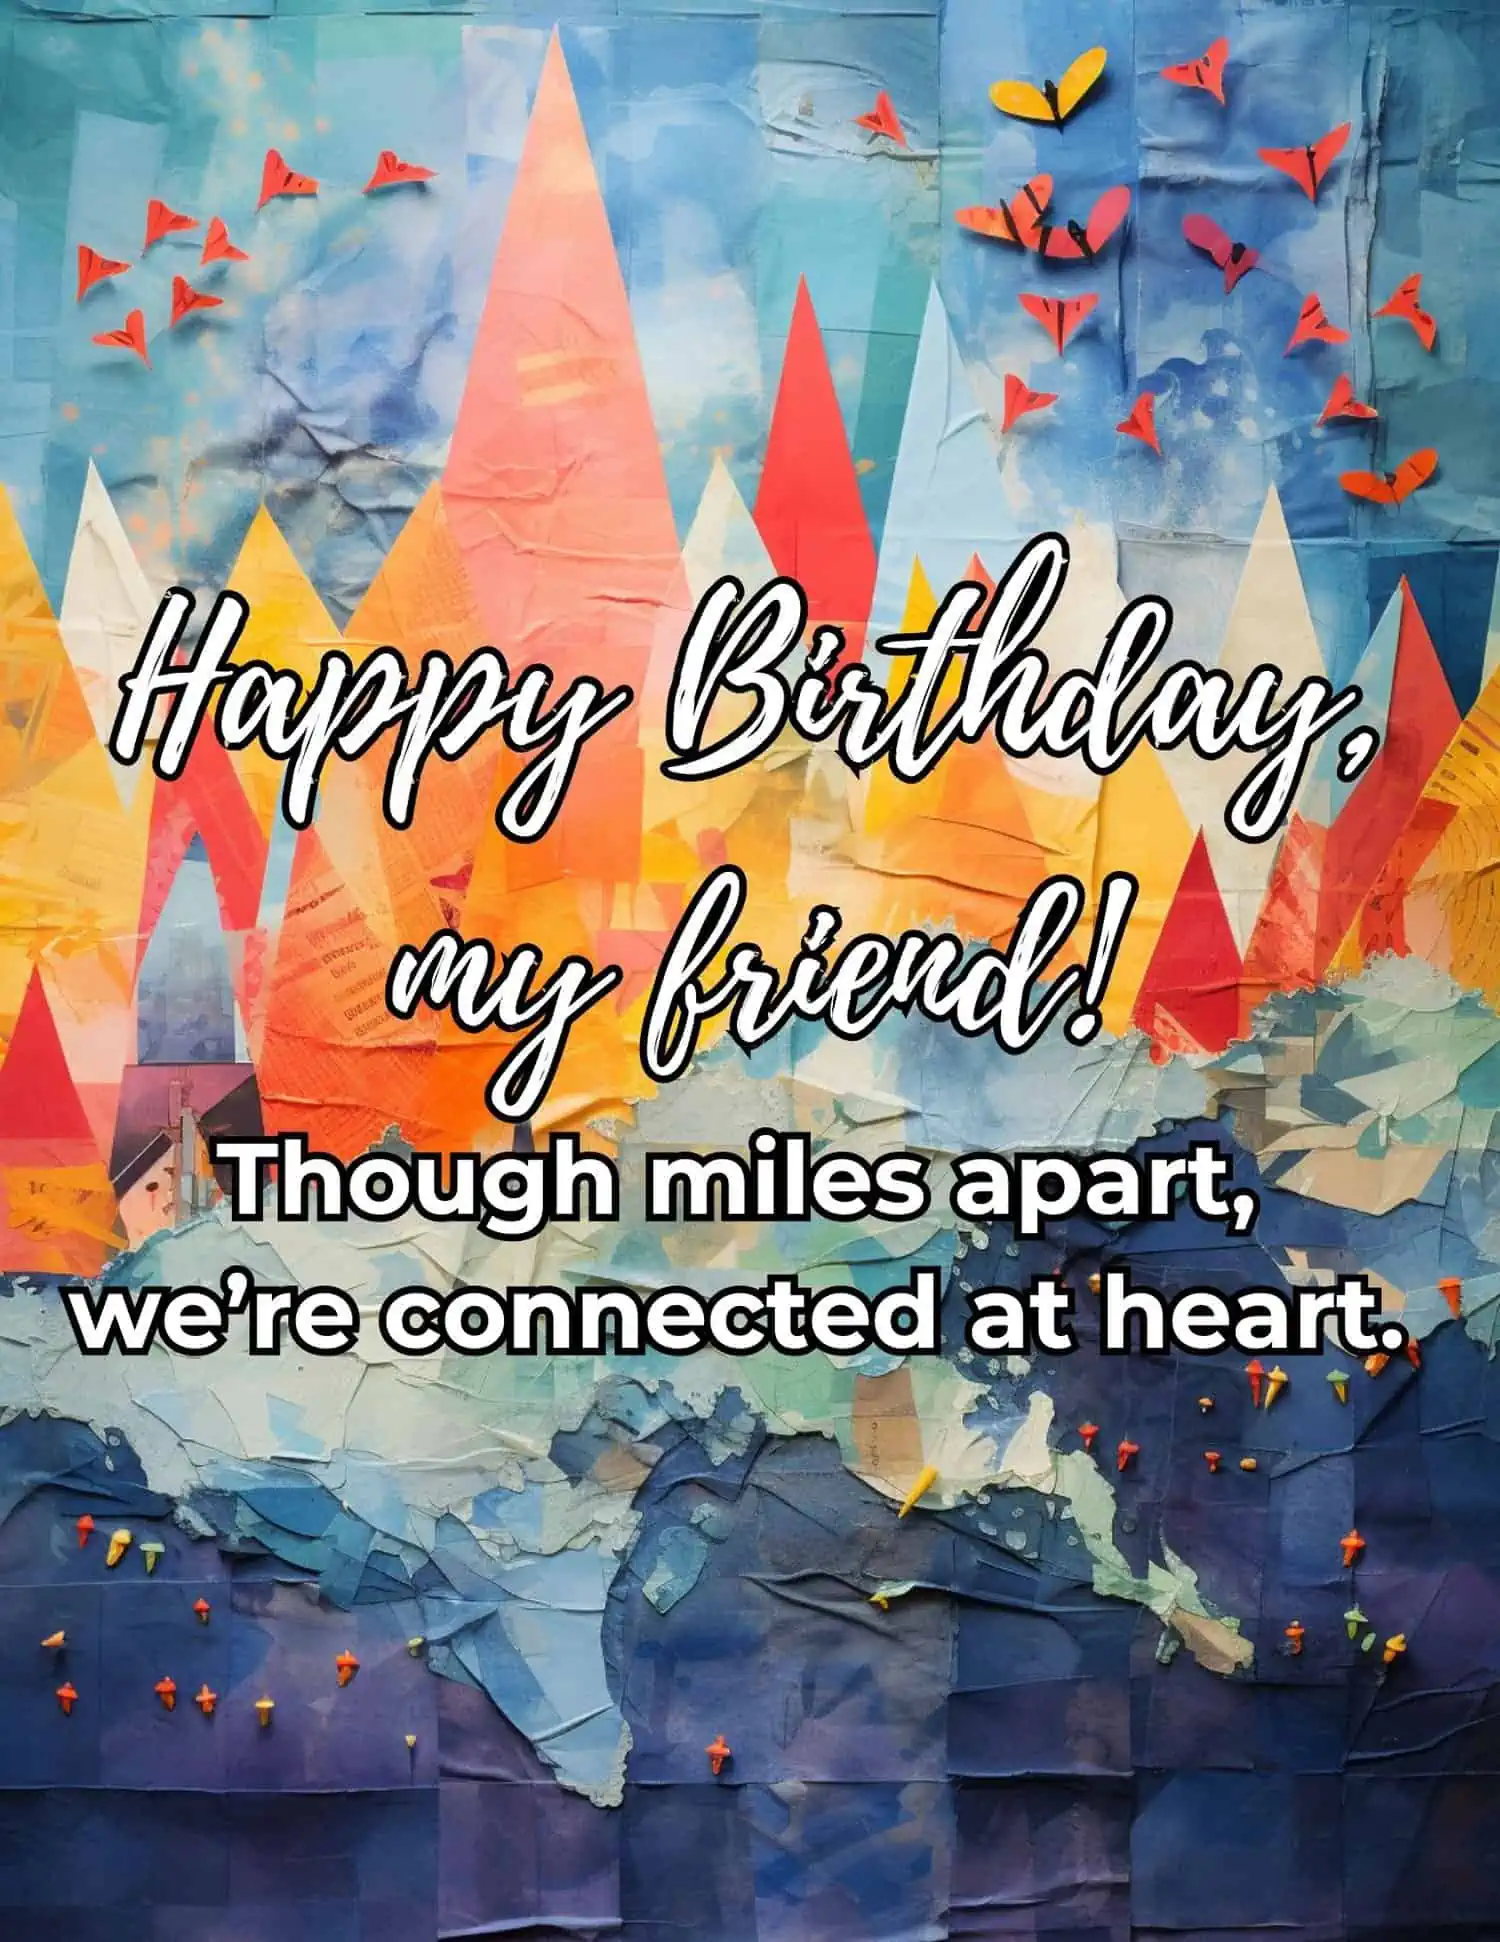 A collection of birthday messages designed to make your long-distance friend feel special and loved, even from miles away.